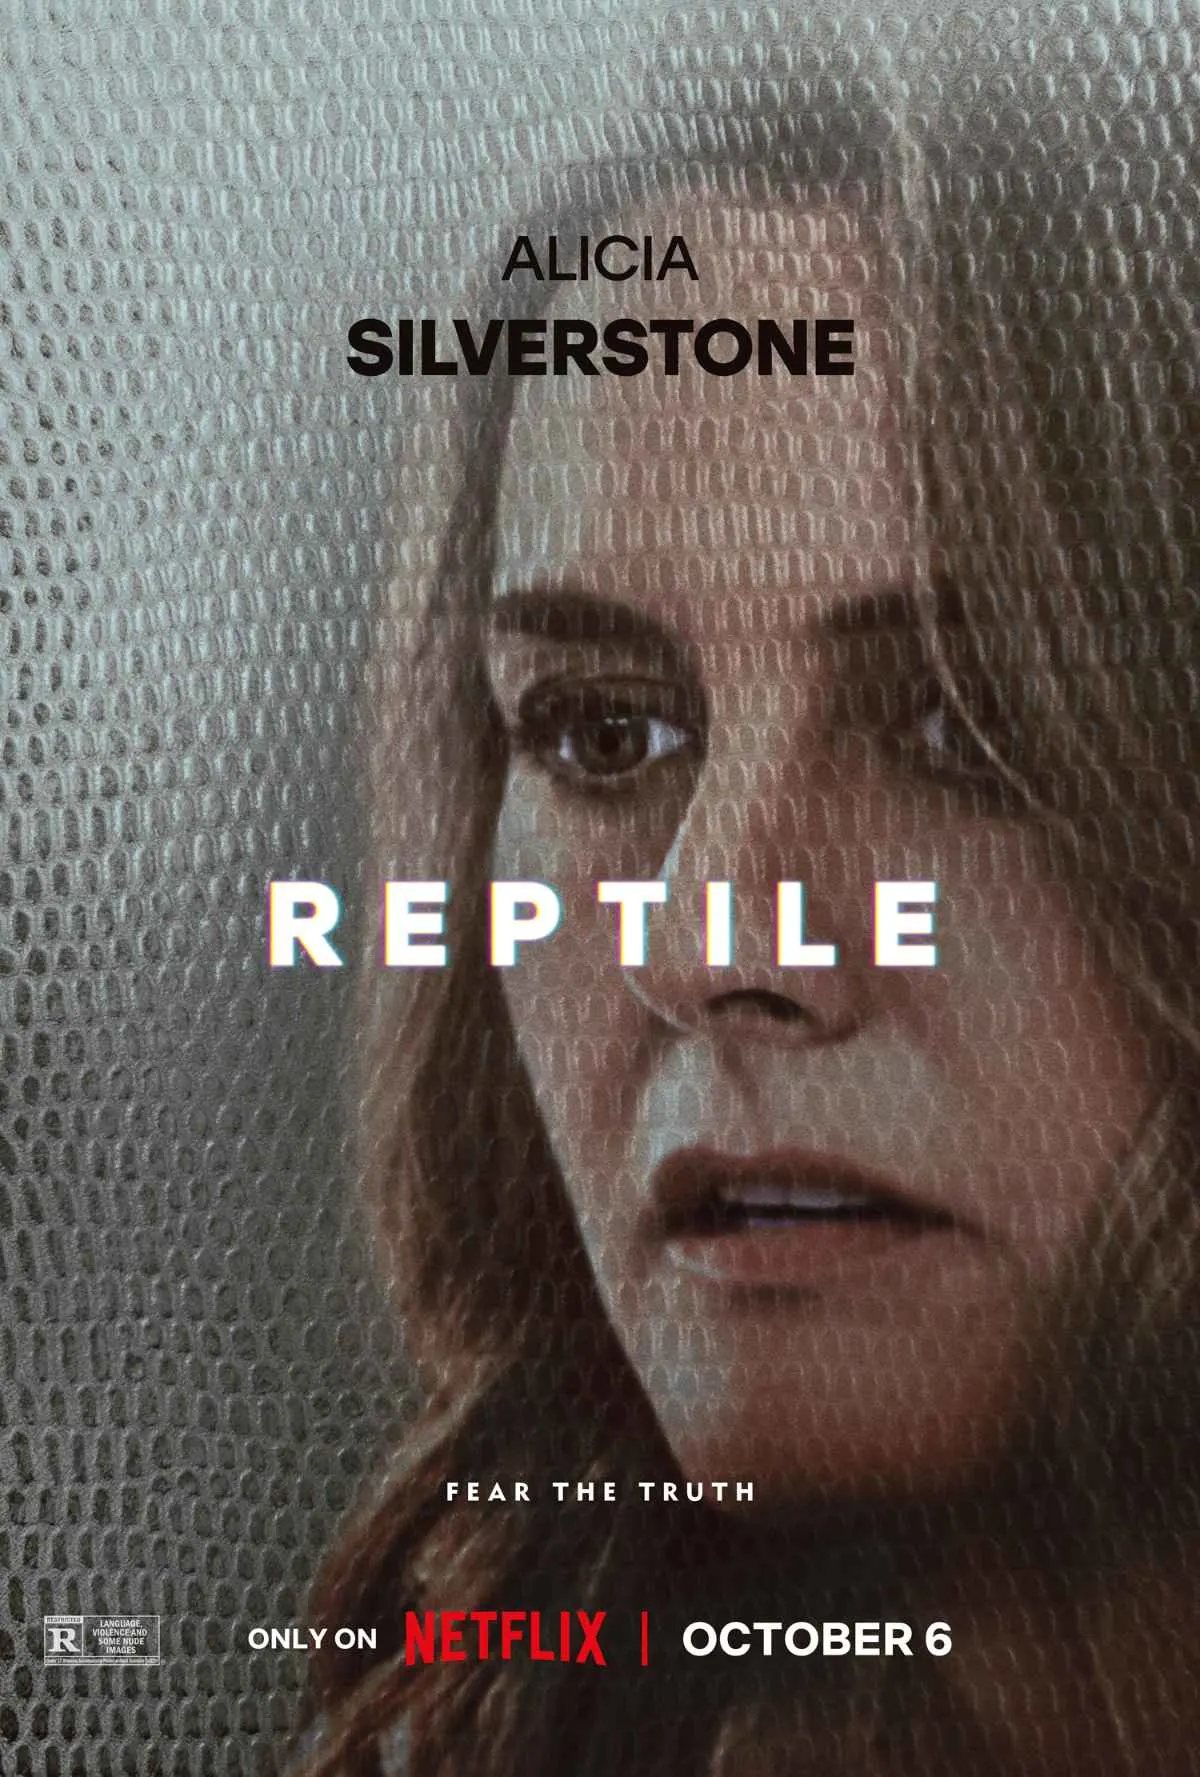 Reptile Trailer and Posters Revealed by Netflix